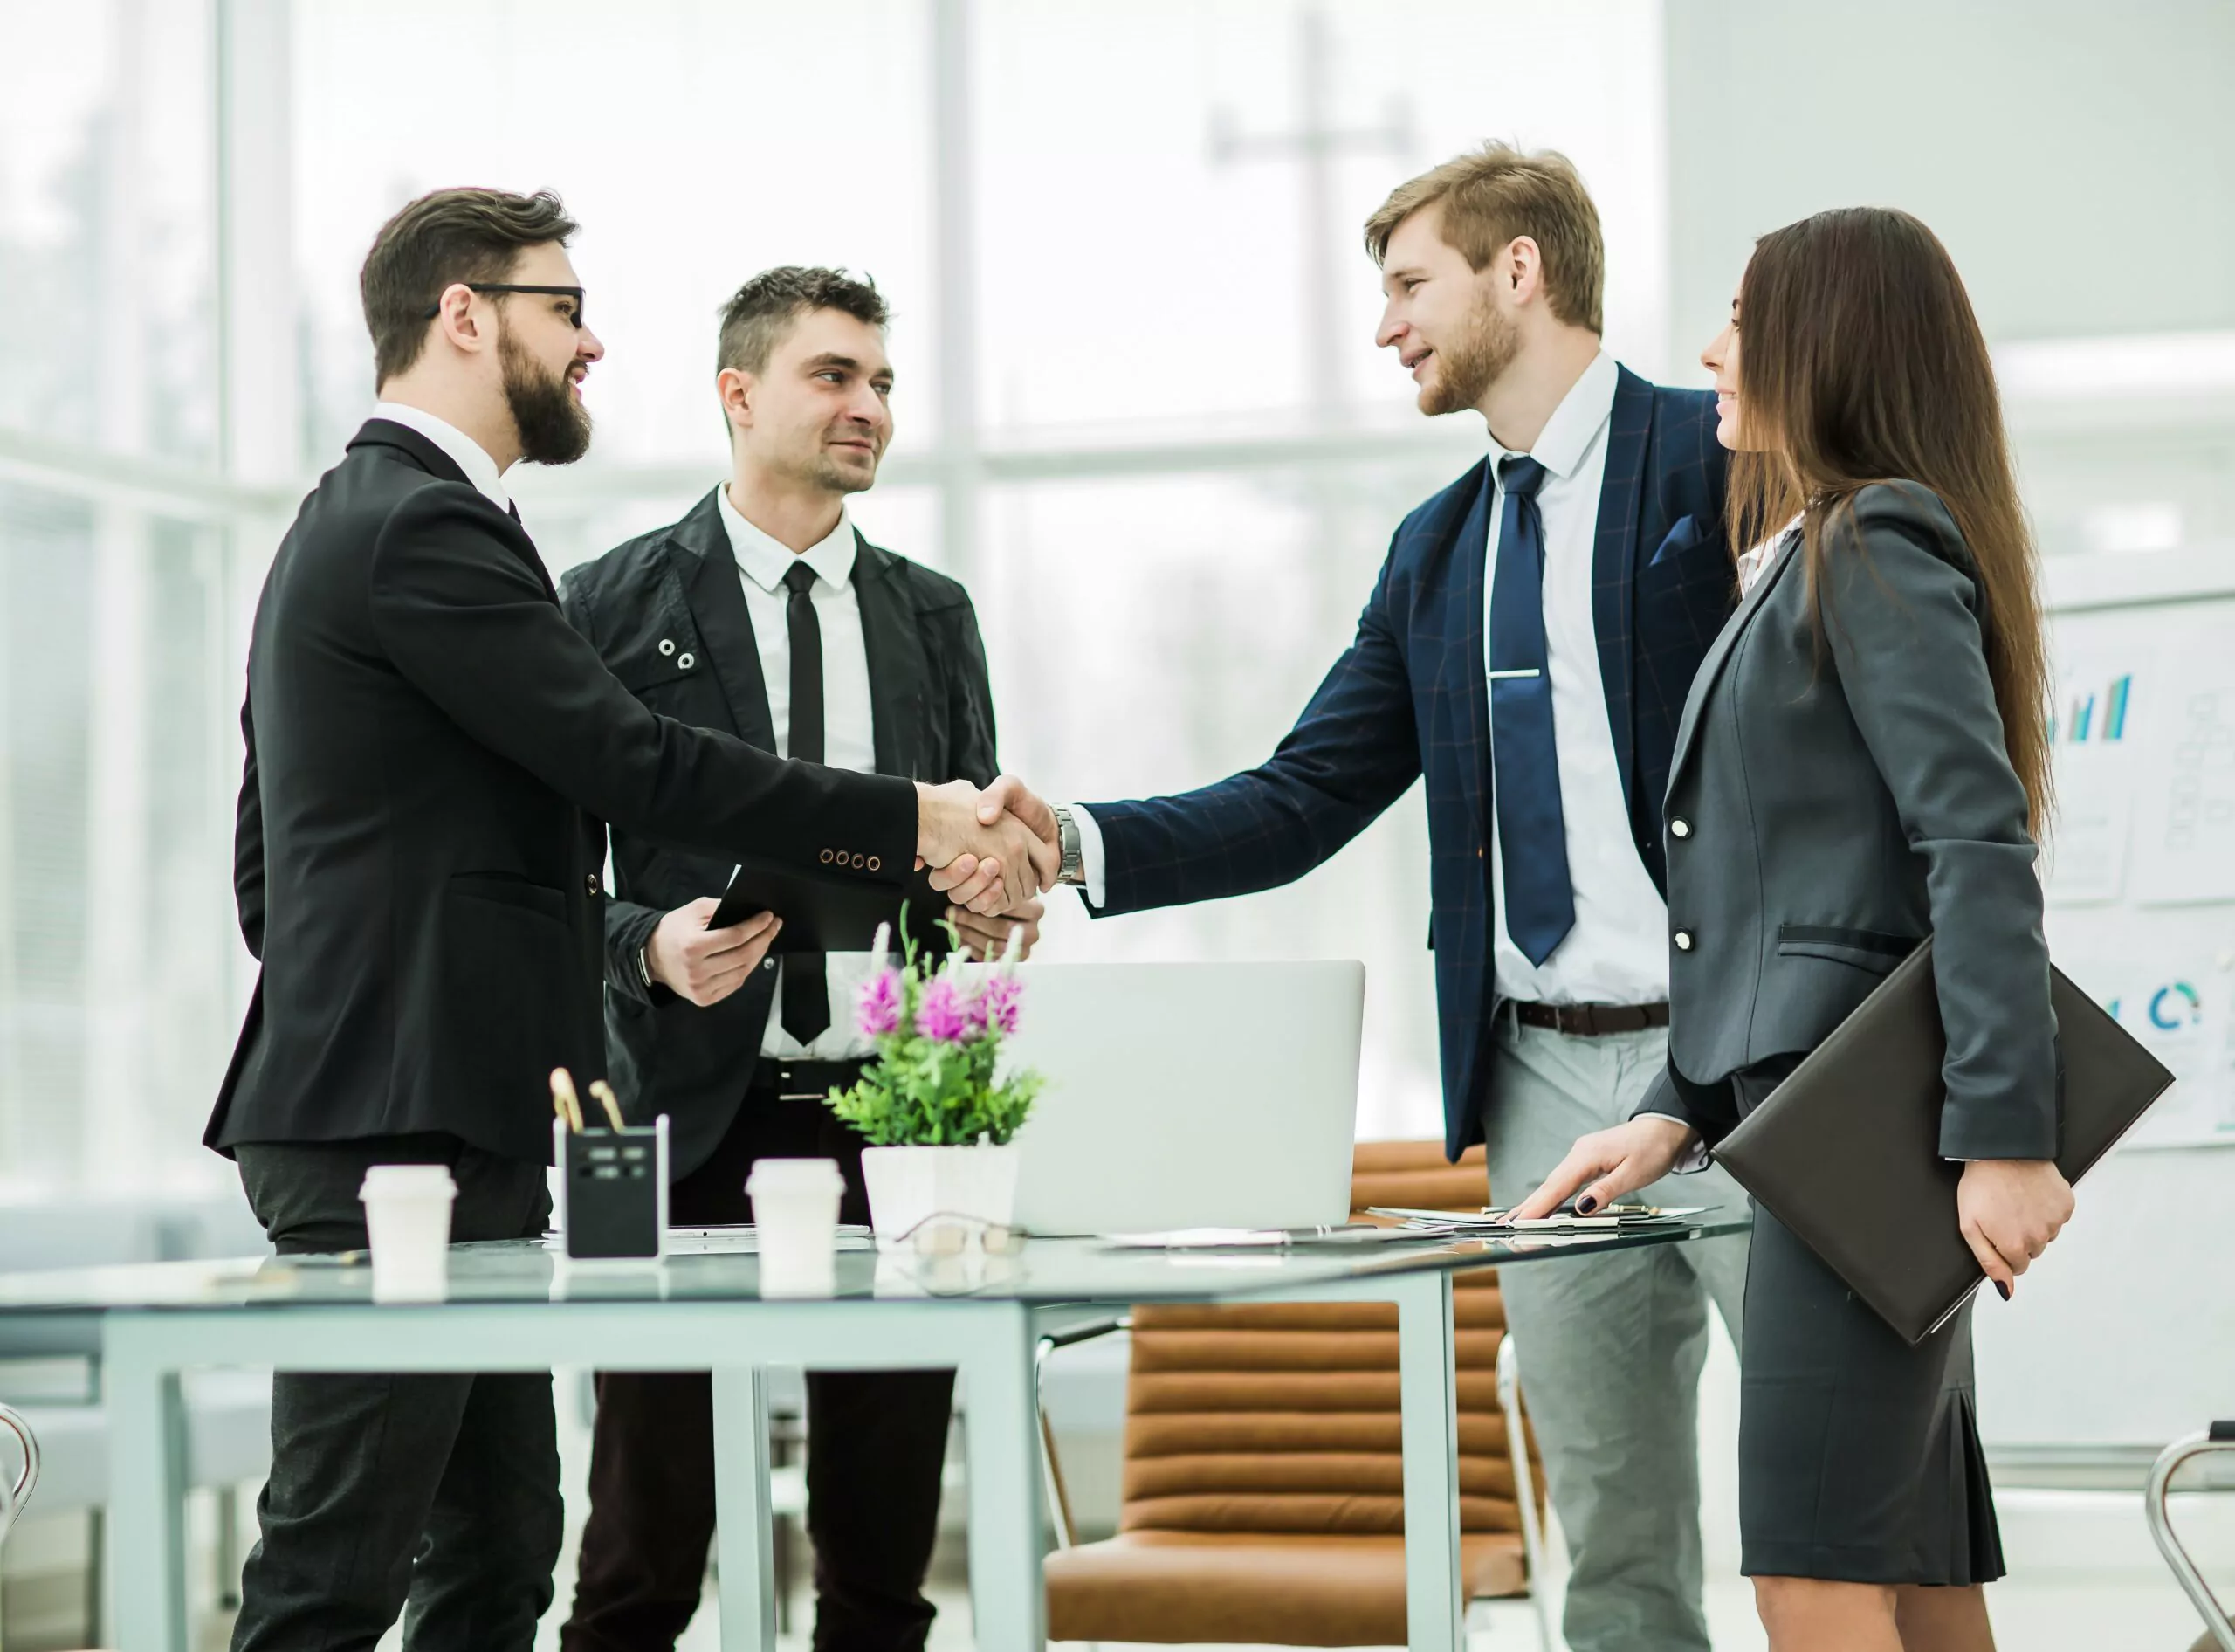 handshake of business partners after signing the contract in the workplace in a modern office